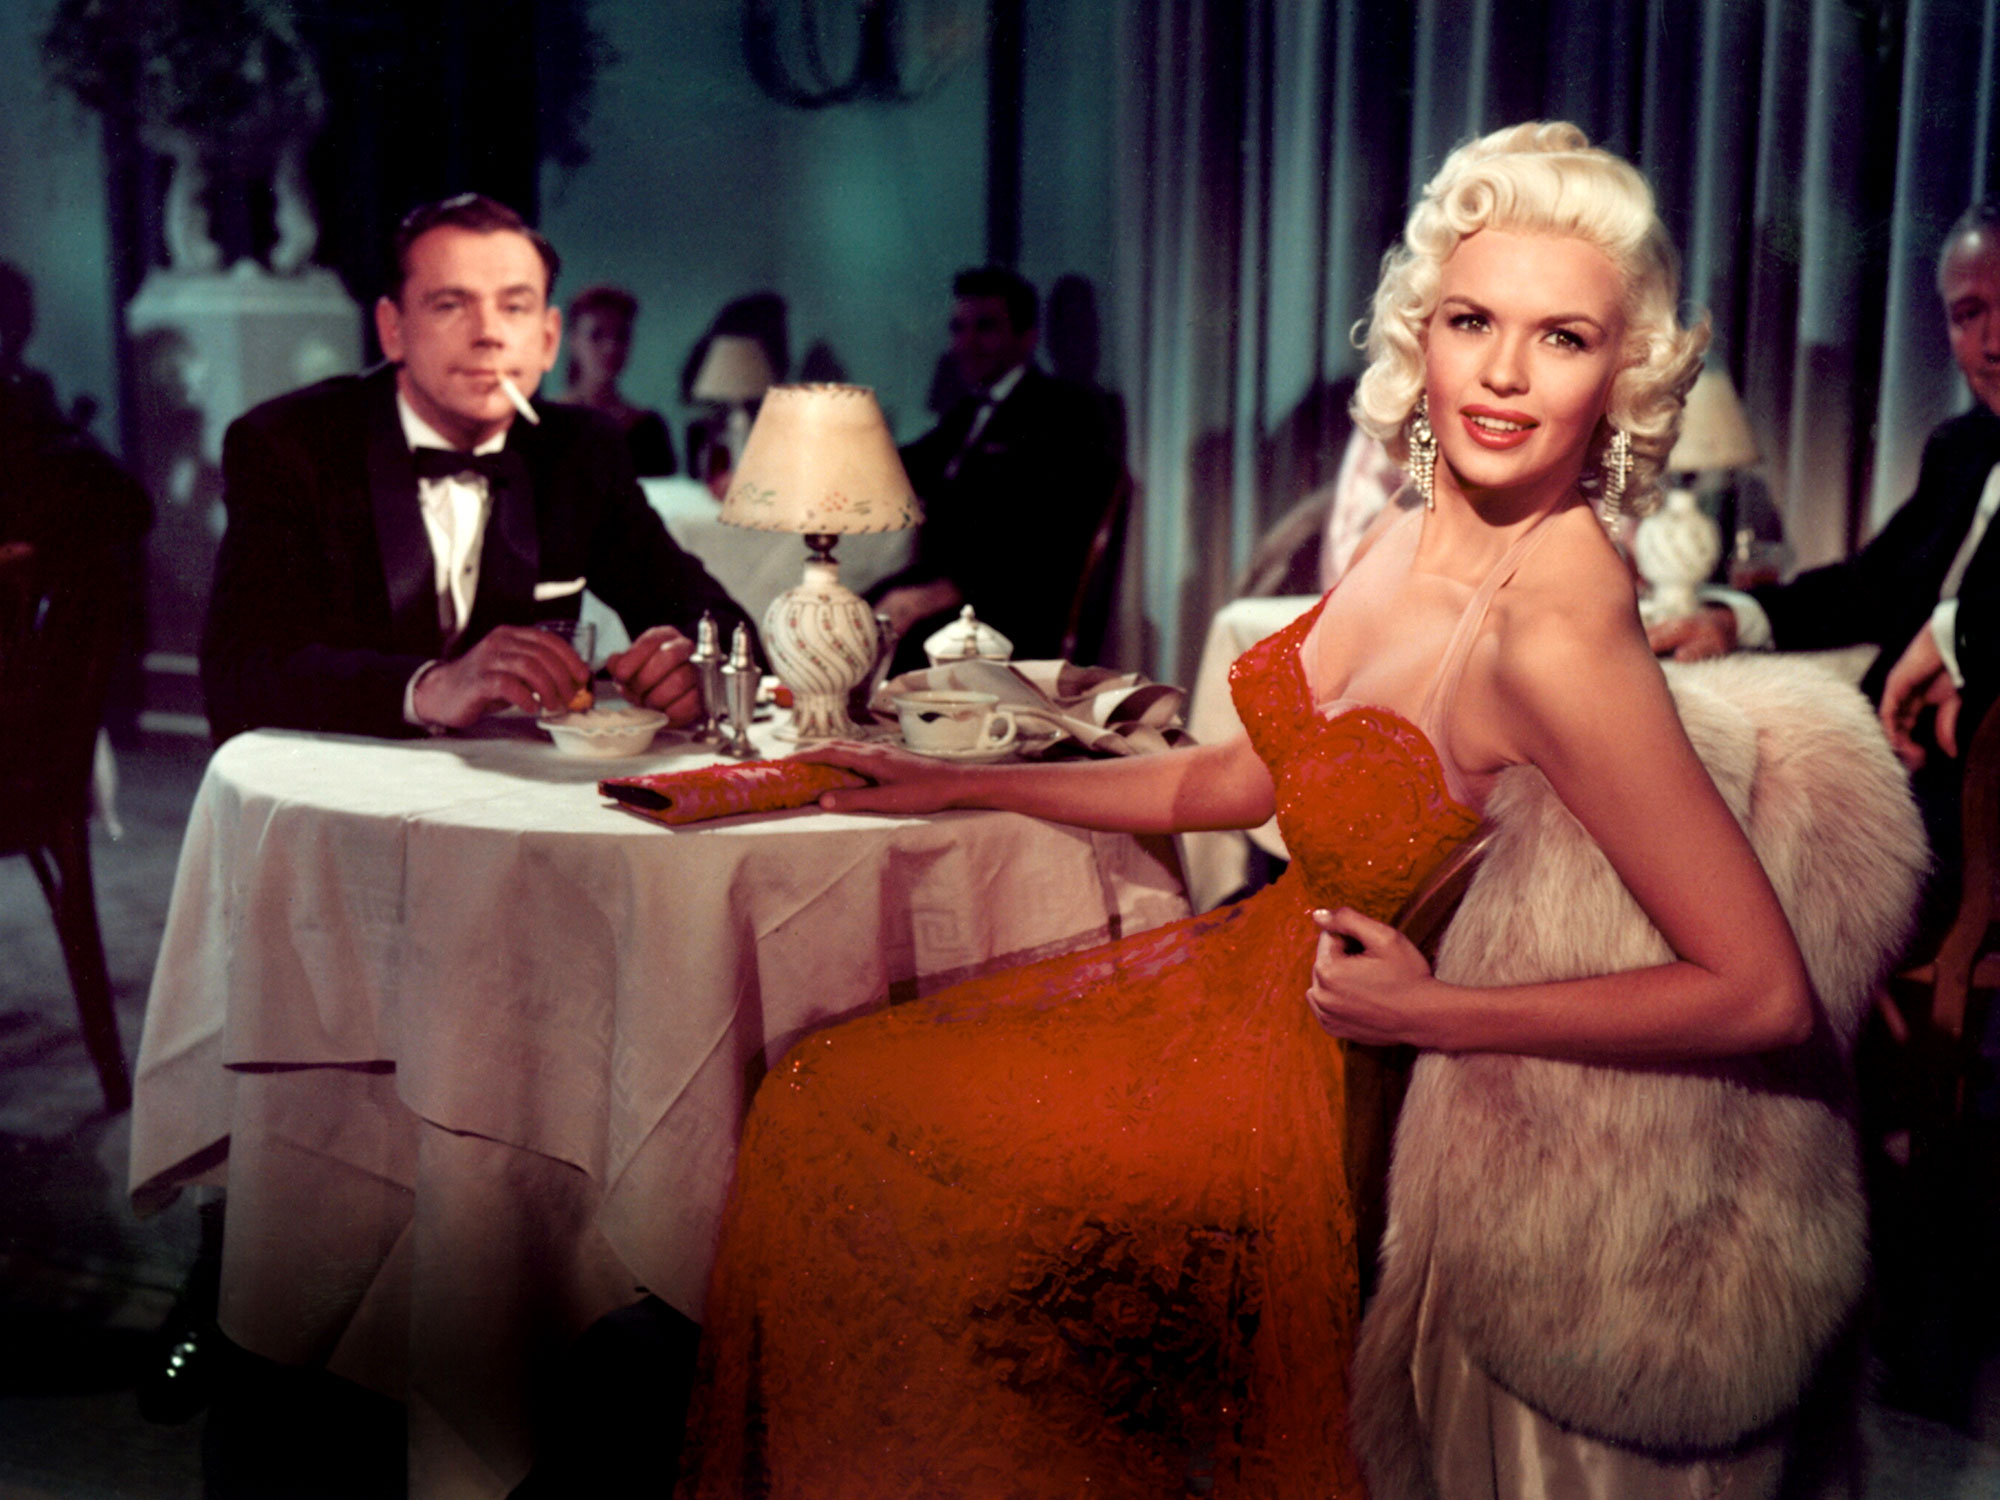 Why I love Jayne Mansfield’s performance in The Girl Can’t Help It